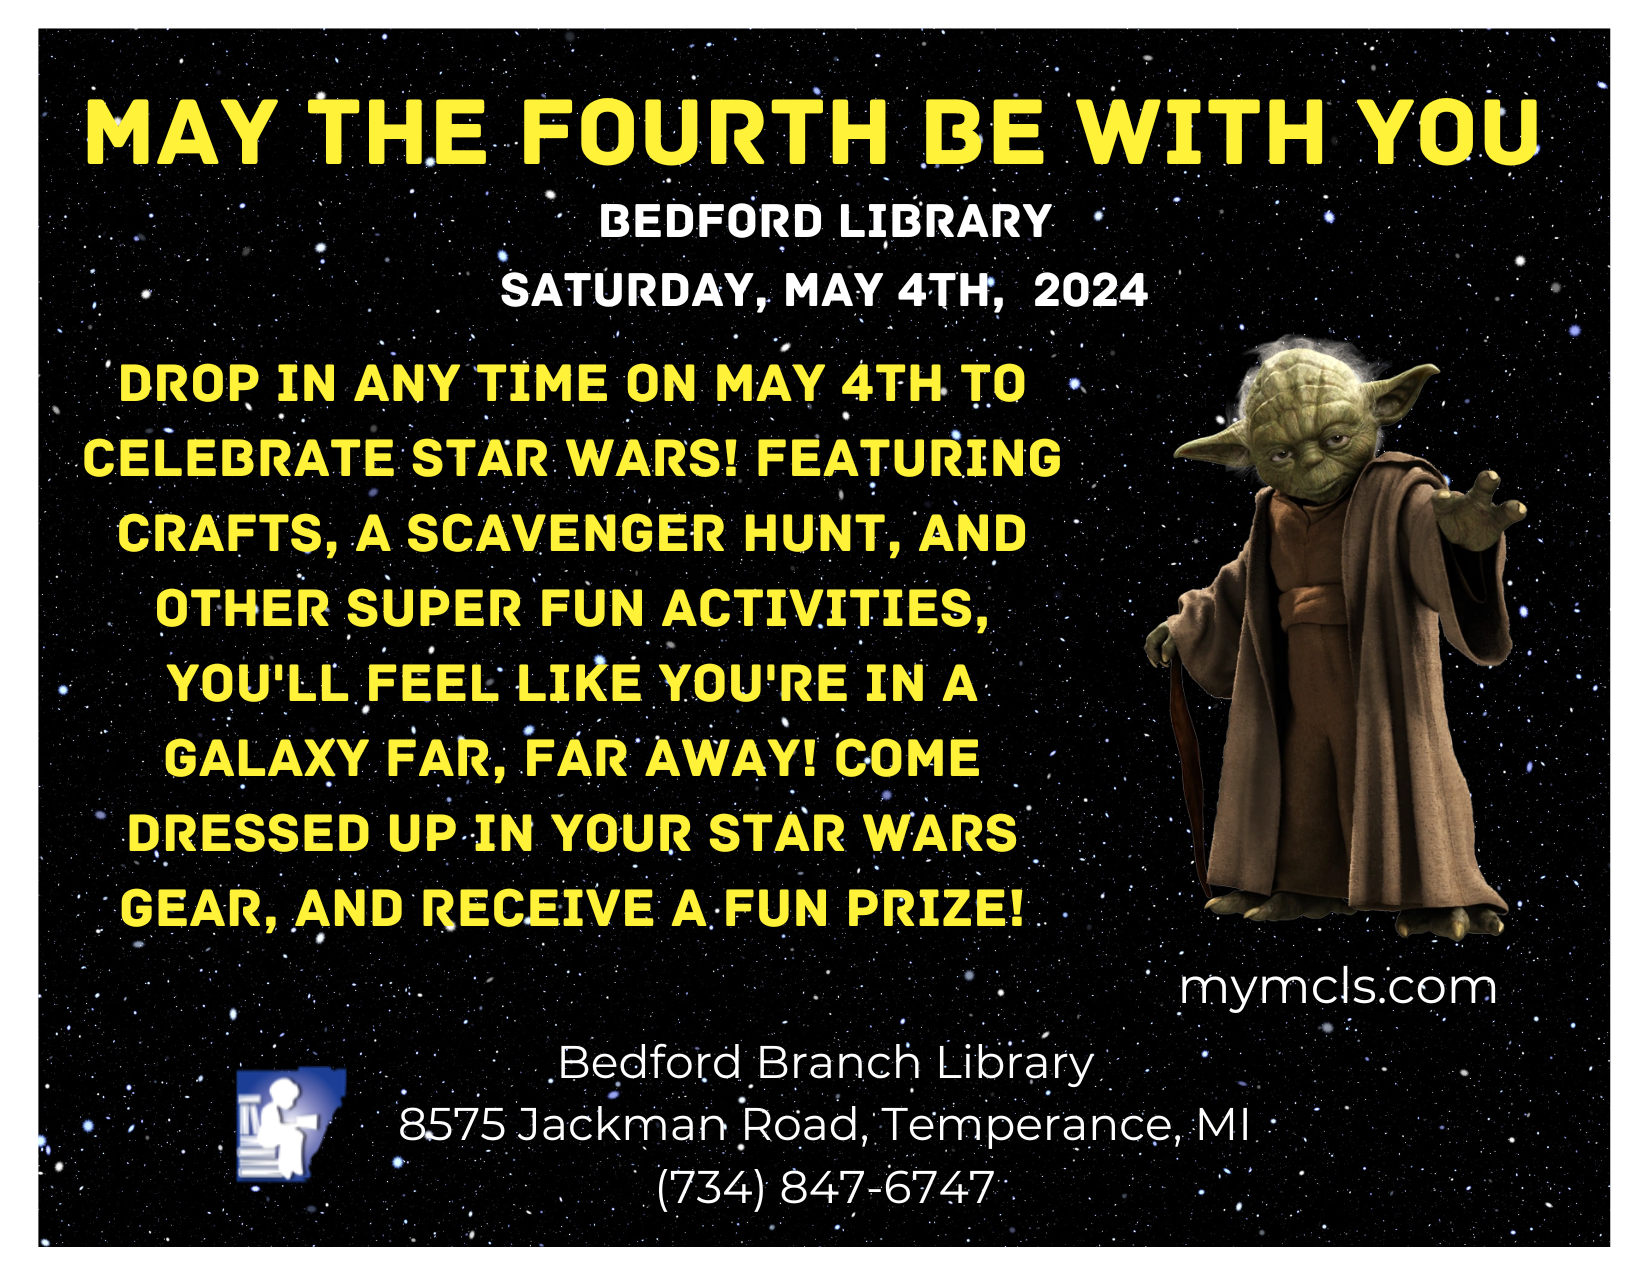 Drop in any time on May 4th to celebrate Star Wars! Featuring crafts, a scavenger hunt, and other super fun activities, you'll feel like you're in a galaxy far, far away! Come dressed up in your Star Wars gear, and receive a fun prize!